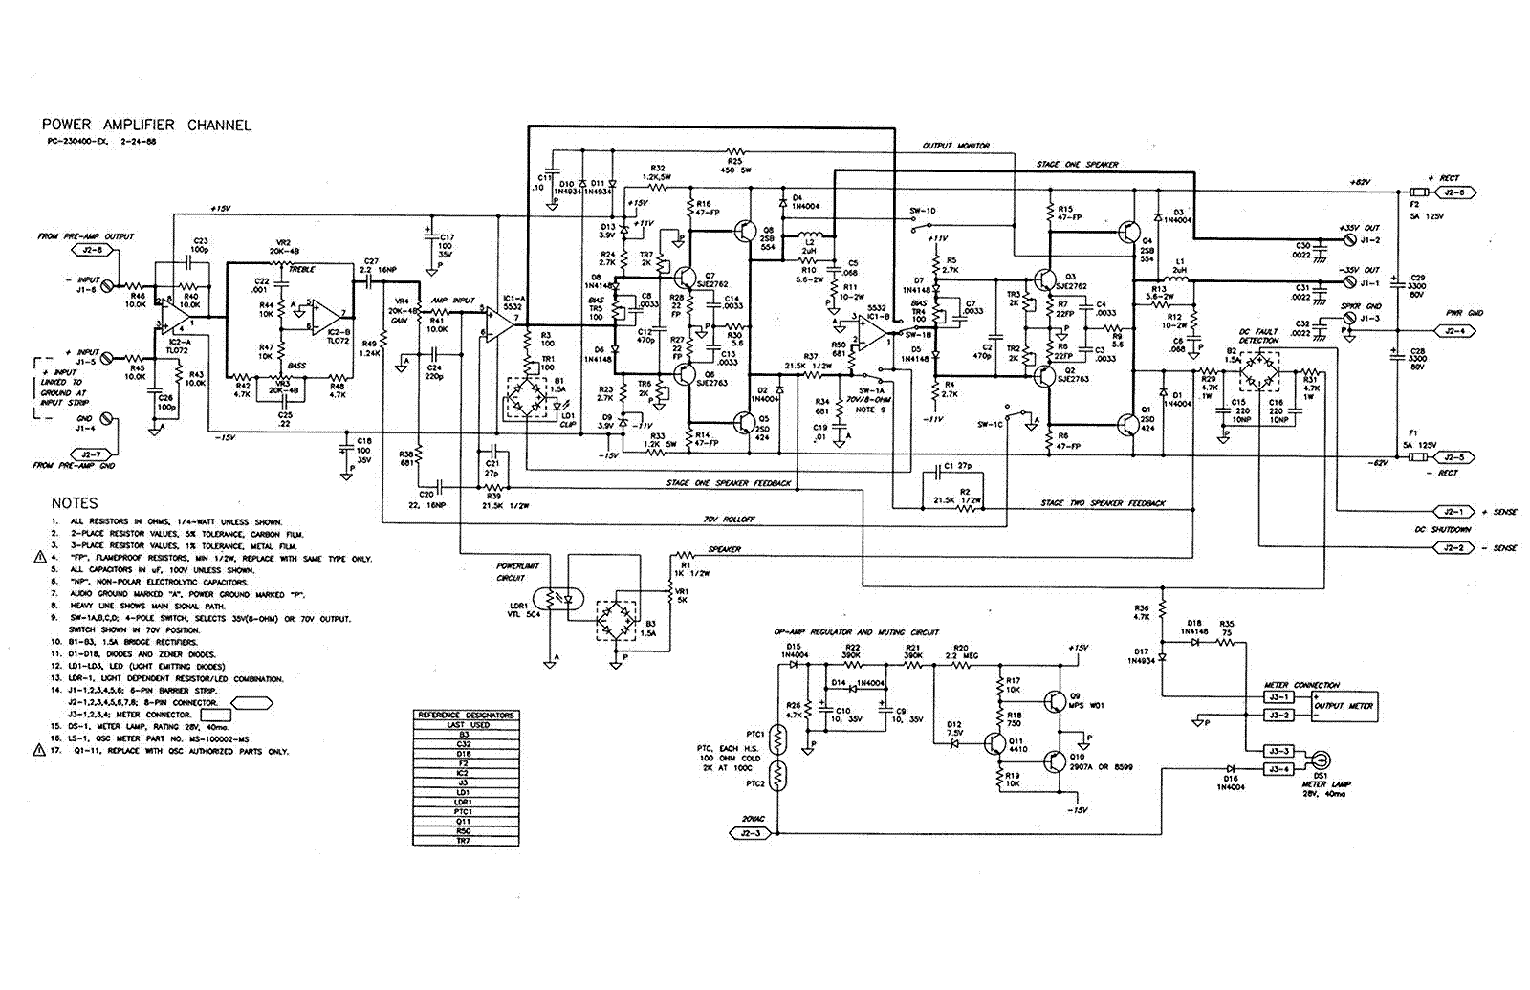 QSC A2300 SCHEMATIC service manual (1st page)